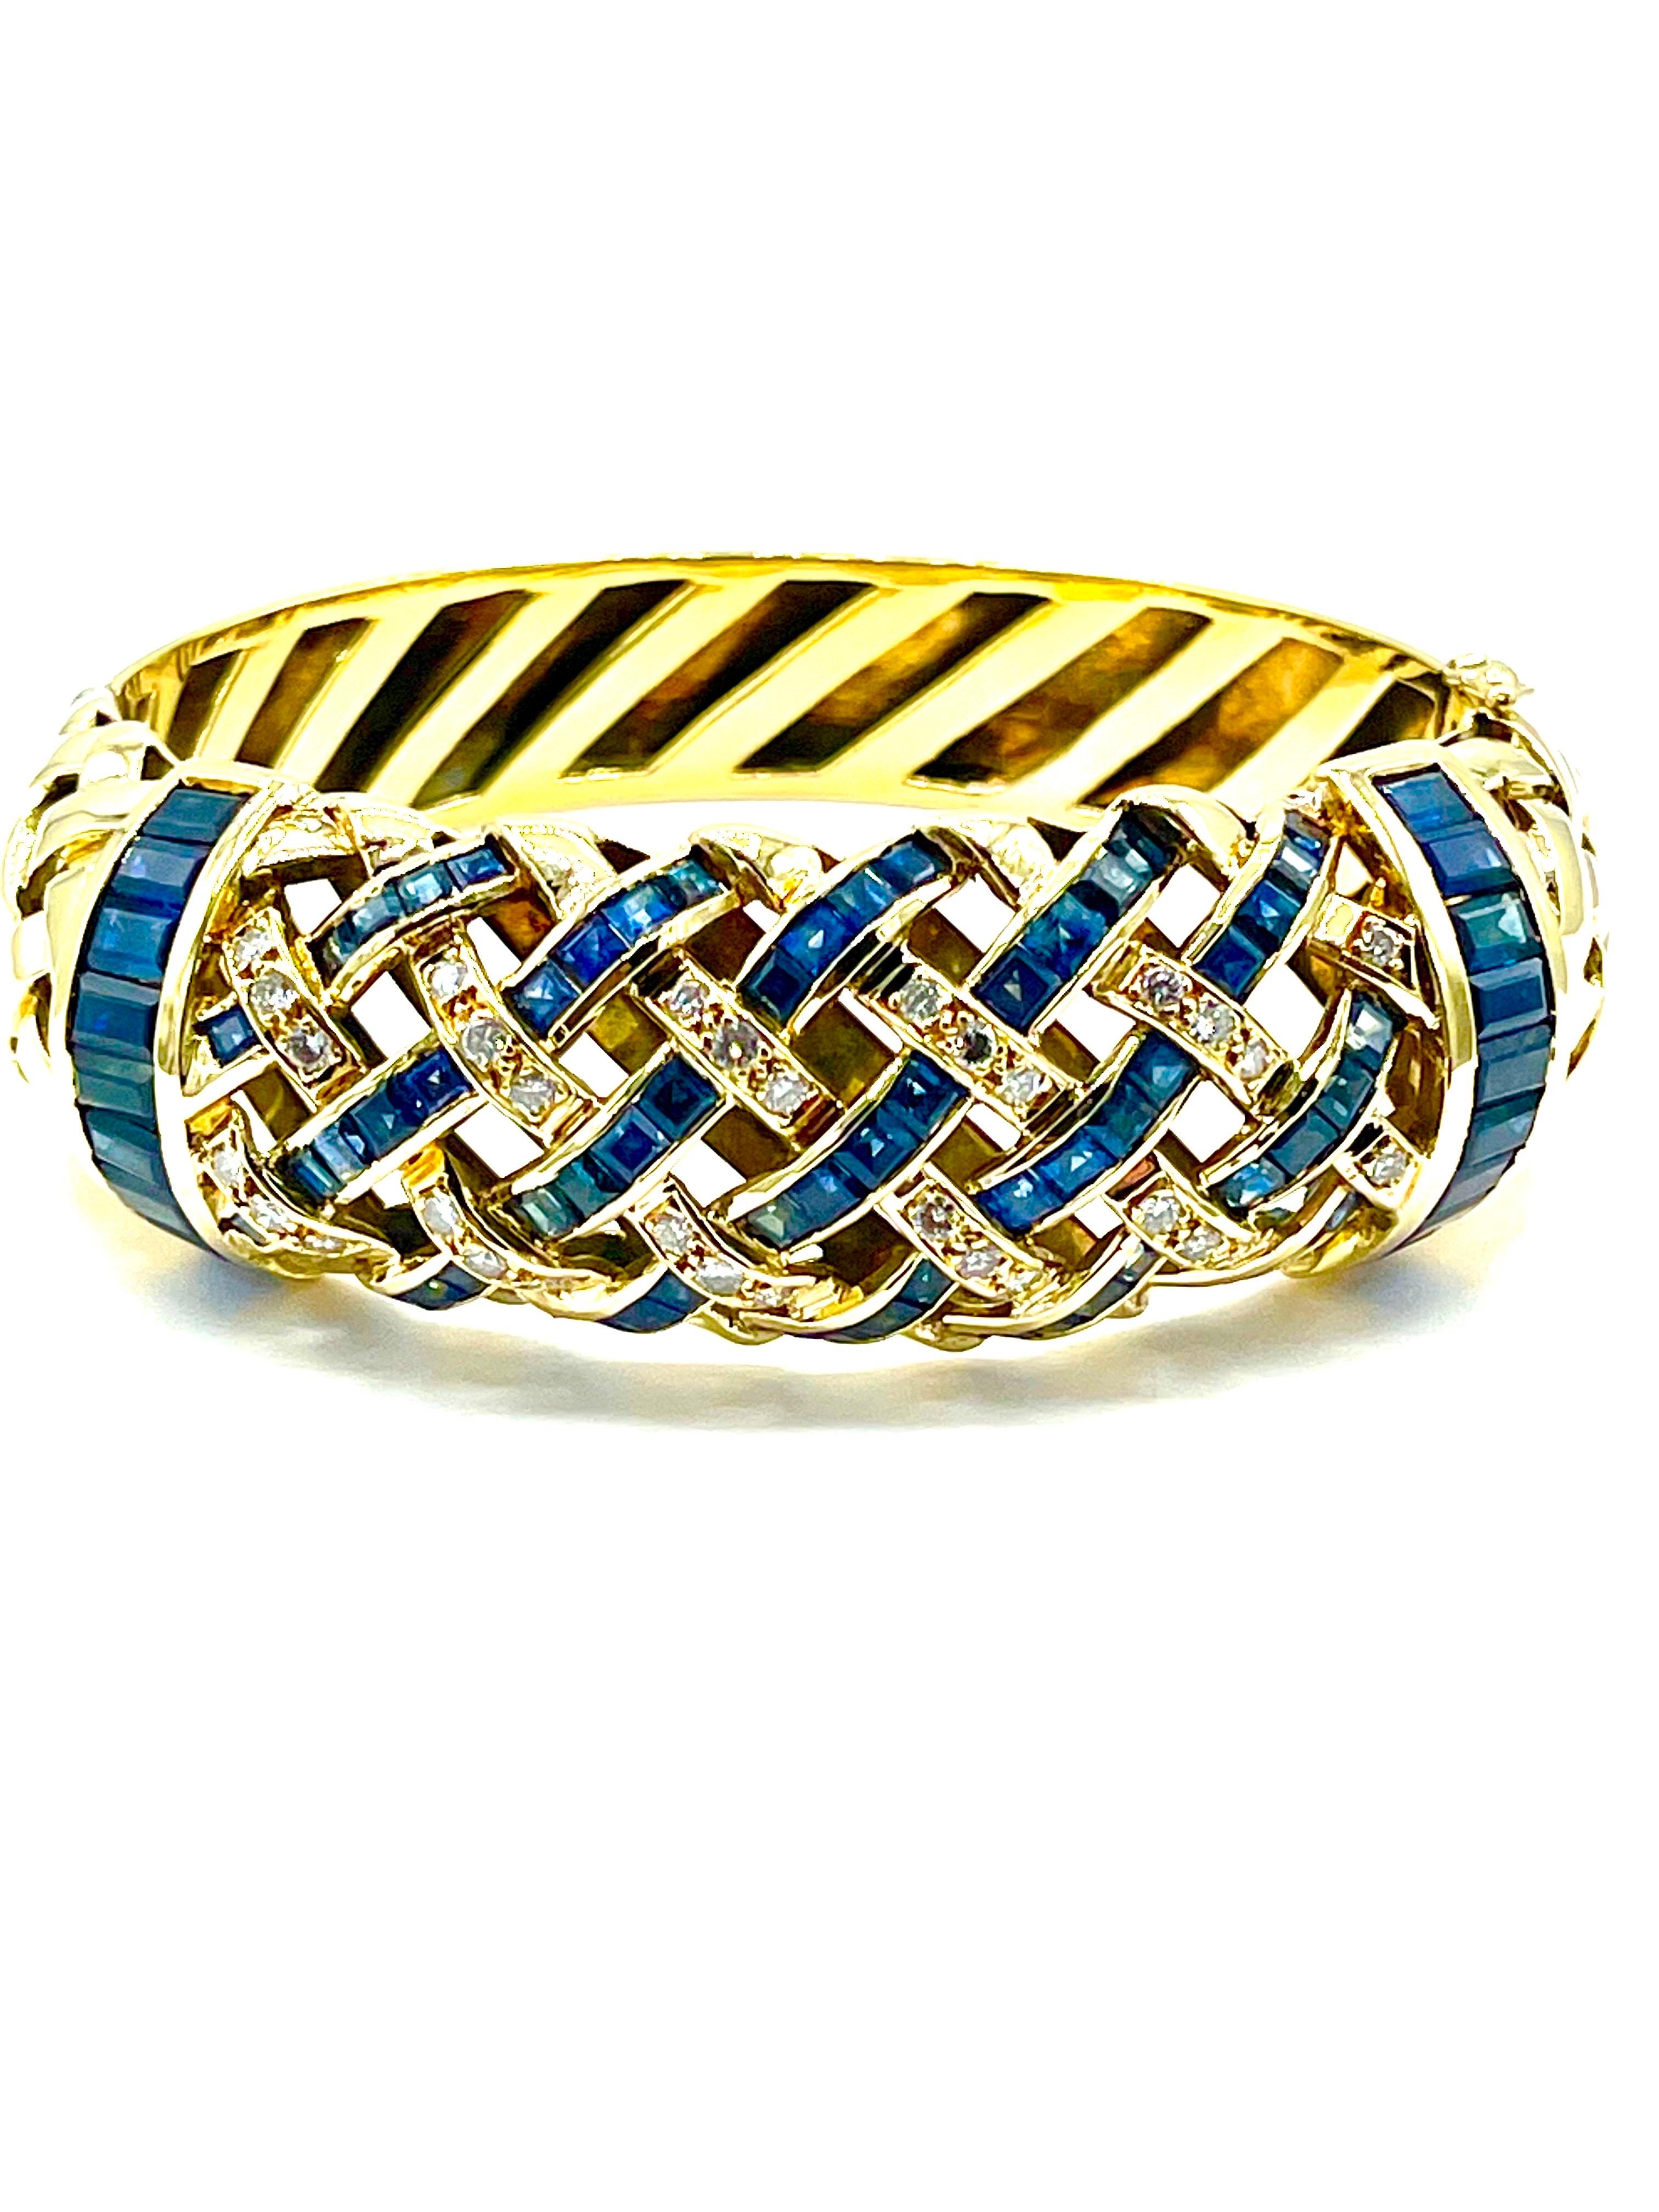 A beautifully made Sapphire and Diamond cuff bracelet.  The bracelet is designed in a basket weave pattern on the top half, with Sapphires and Diamonds overlapping one another, and two large channel set Sapphire bars on each side, set in 18K yellow